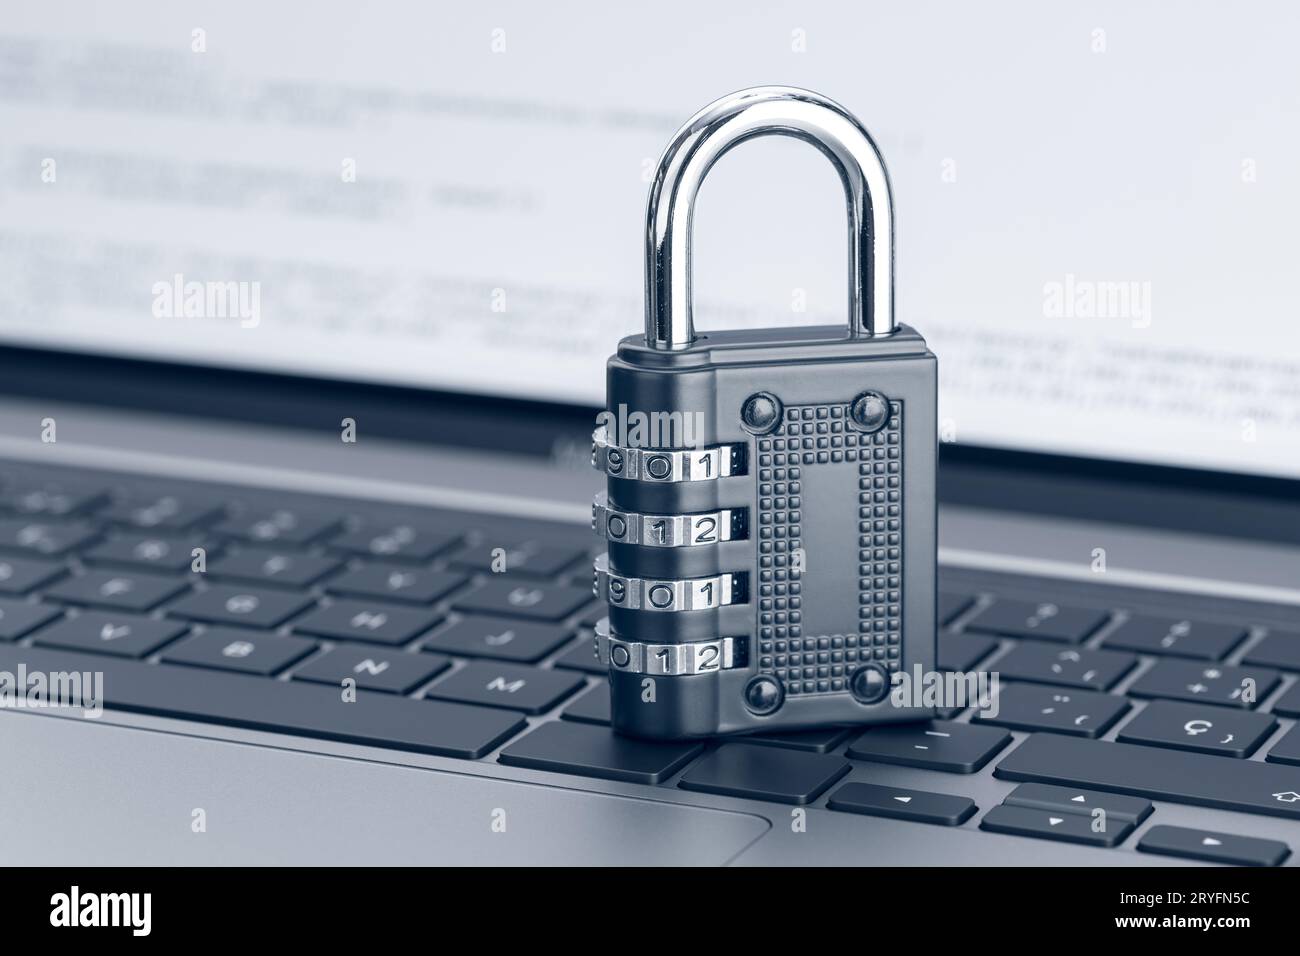 Network Security protection concept. Cyber attack protection. Closed padlock on laptop Stock Photo